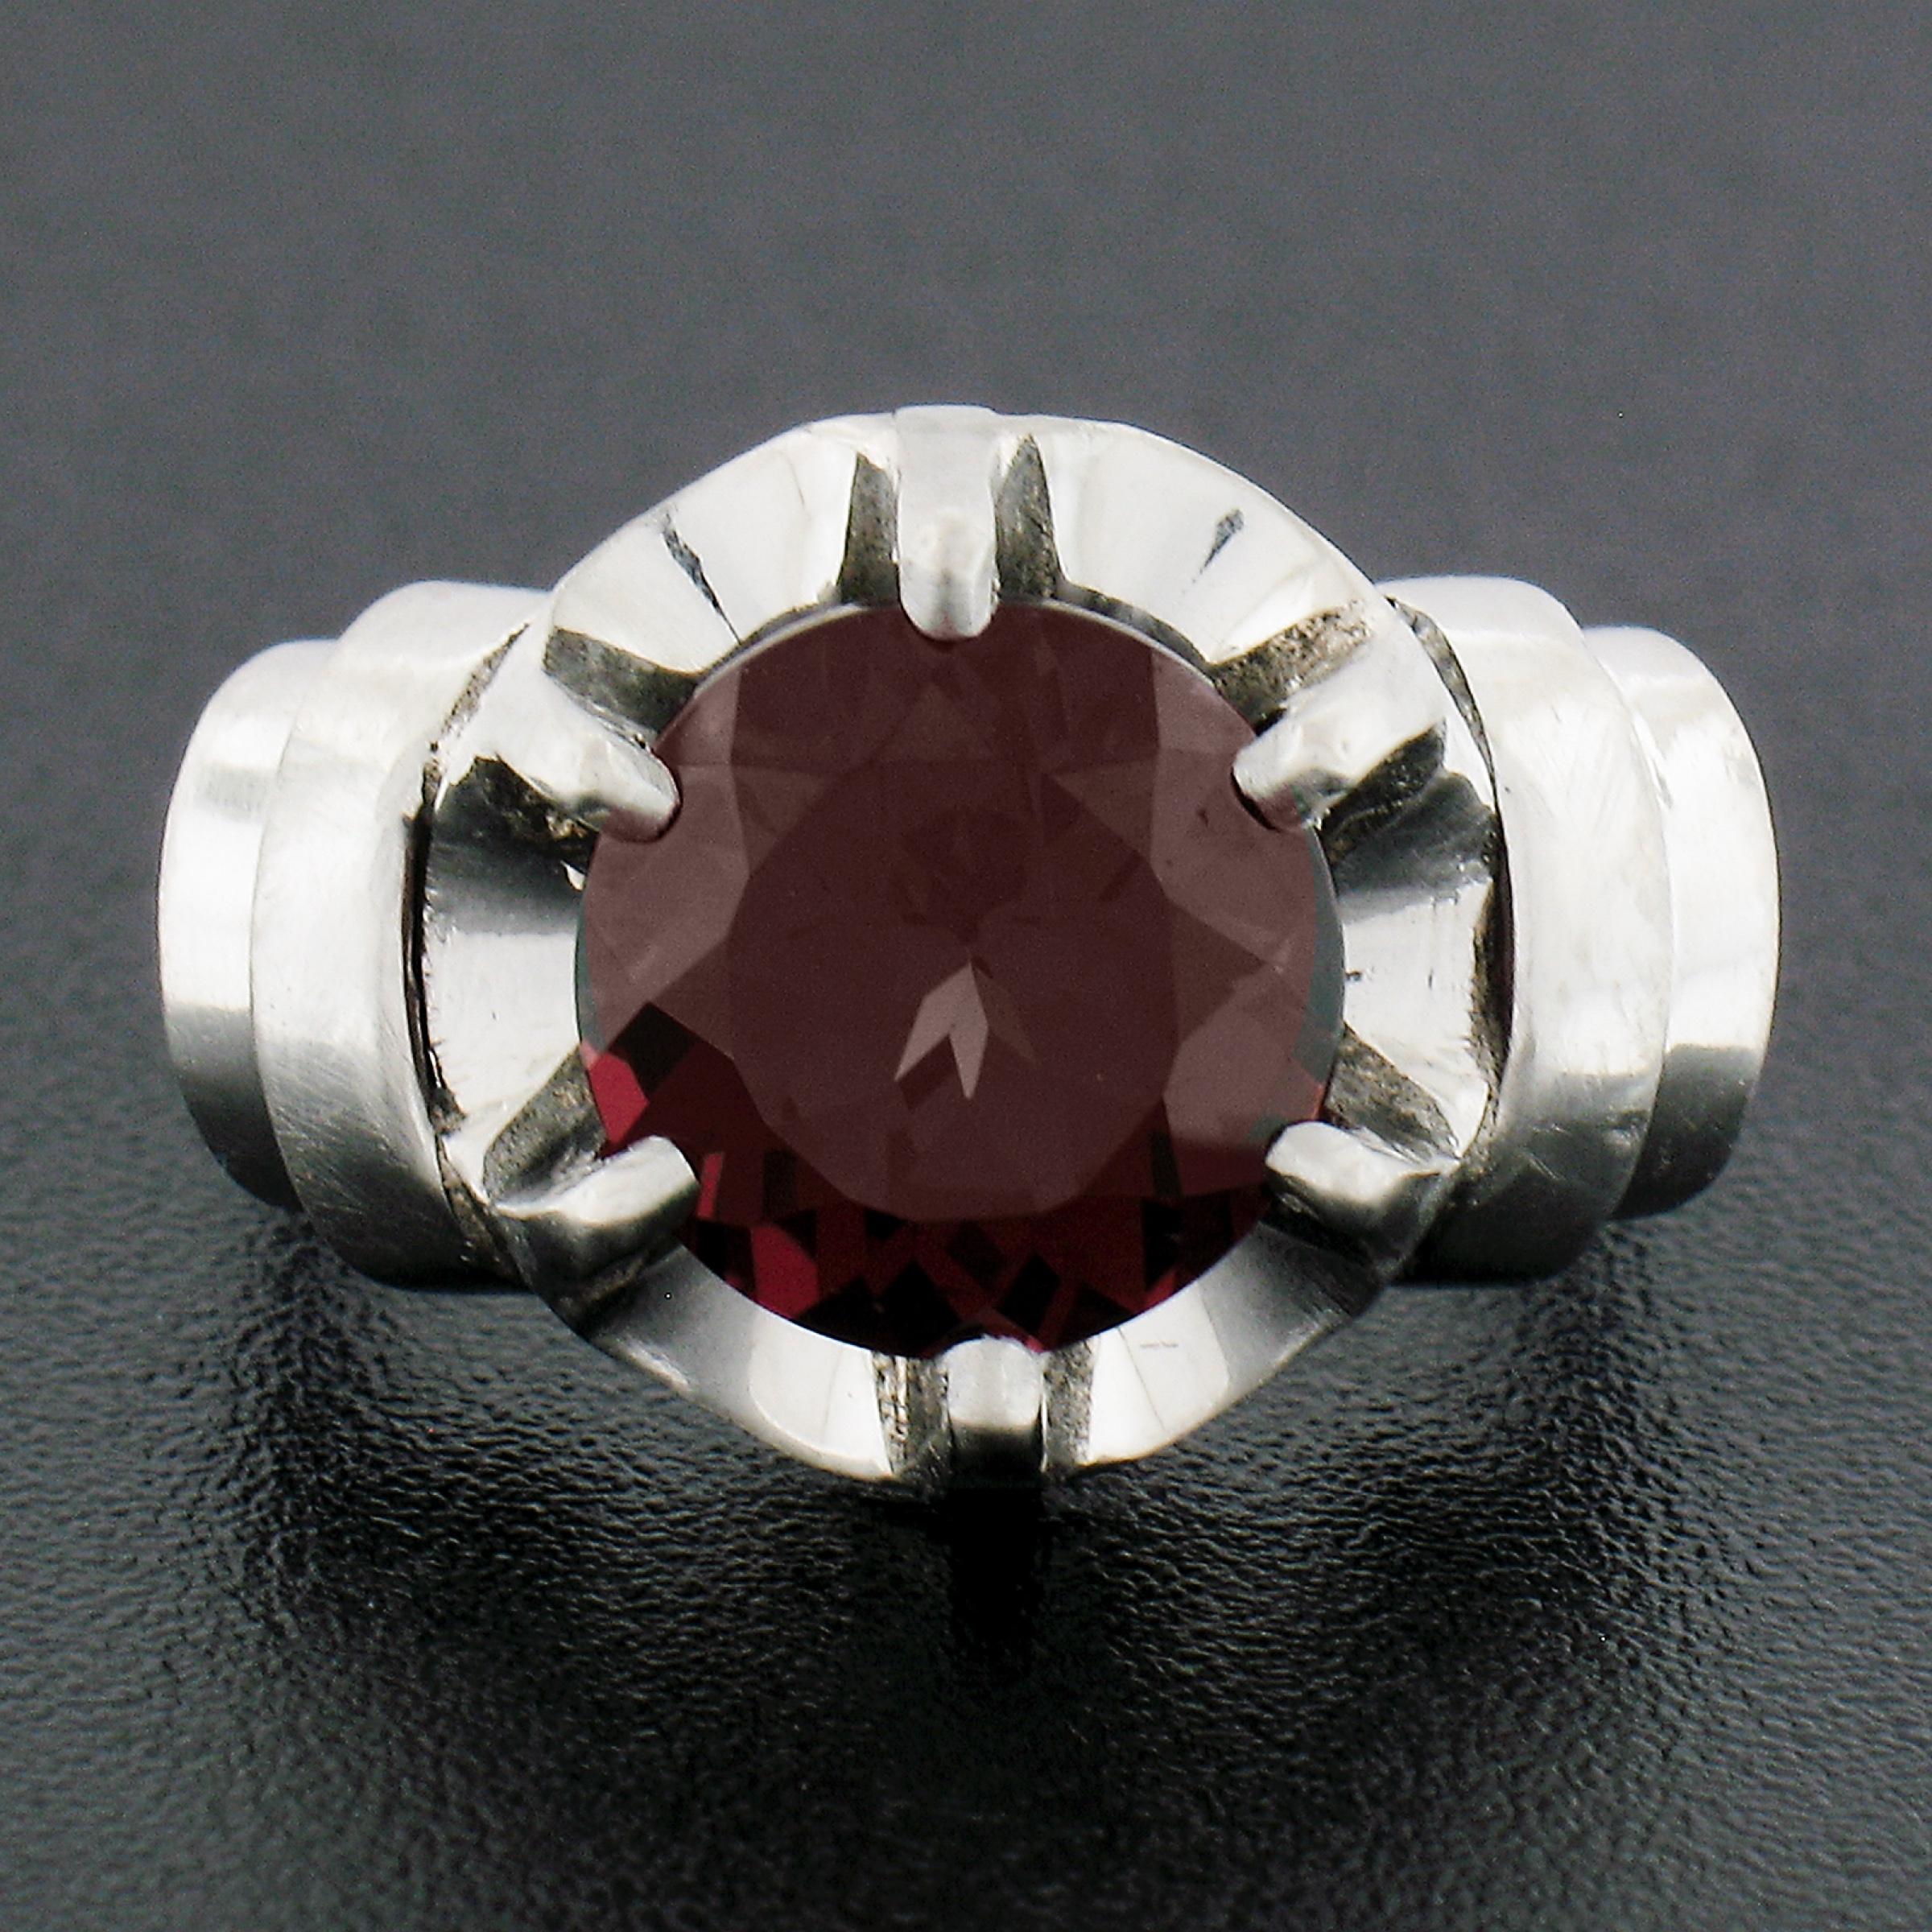 --Stone(s):--
(1) Natural Genuine Rhodolite Garnet - Round Cut - Buttercup Prong Set - Gorgeous Rich Red Color - 9mm (approx.) - 3.50ct (exact)

Material: Solid Platinum
Weight: 7.62 Grams
Ring Size: 4.5 (Fitted on a finger. We can custom size this